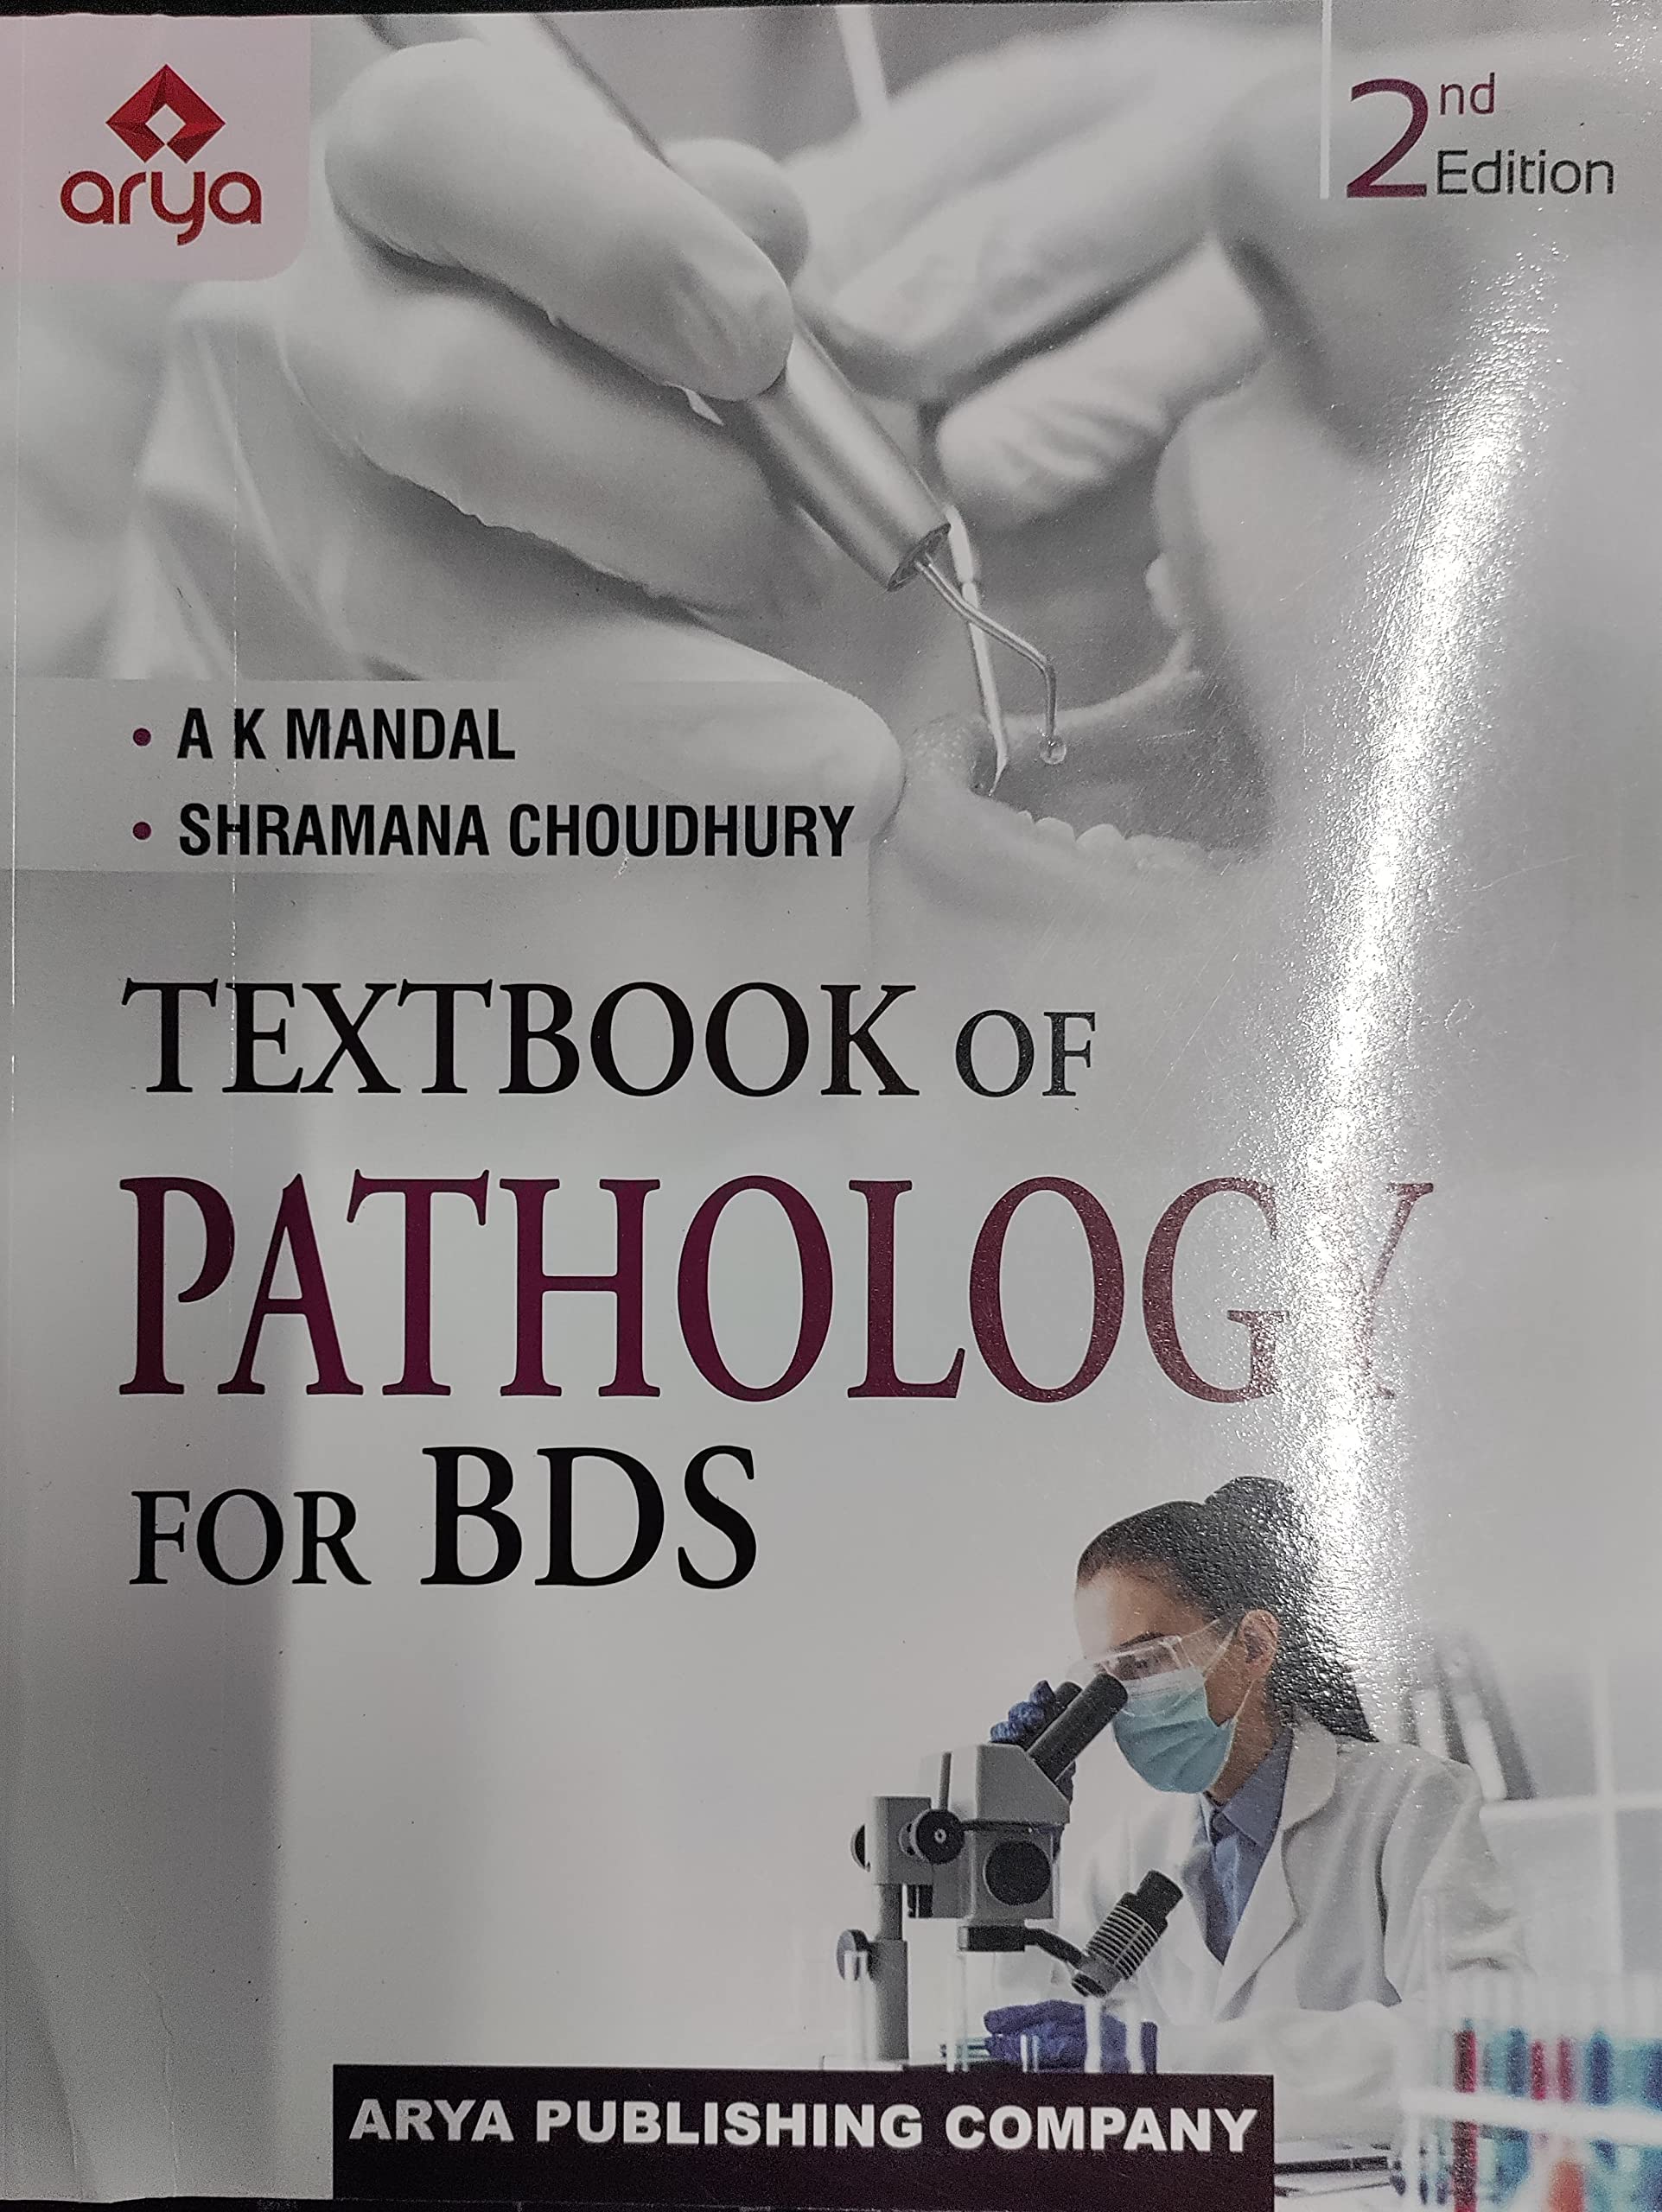 Textbook Of Pathology For BDS 2nd edition